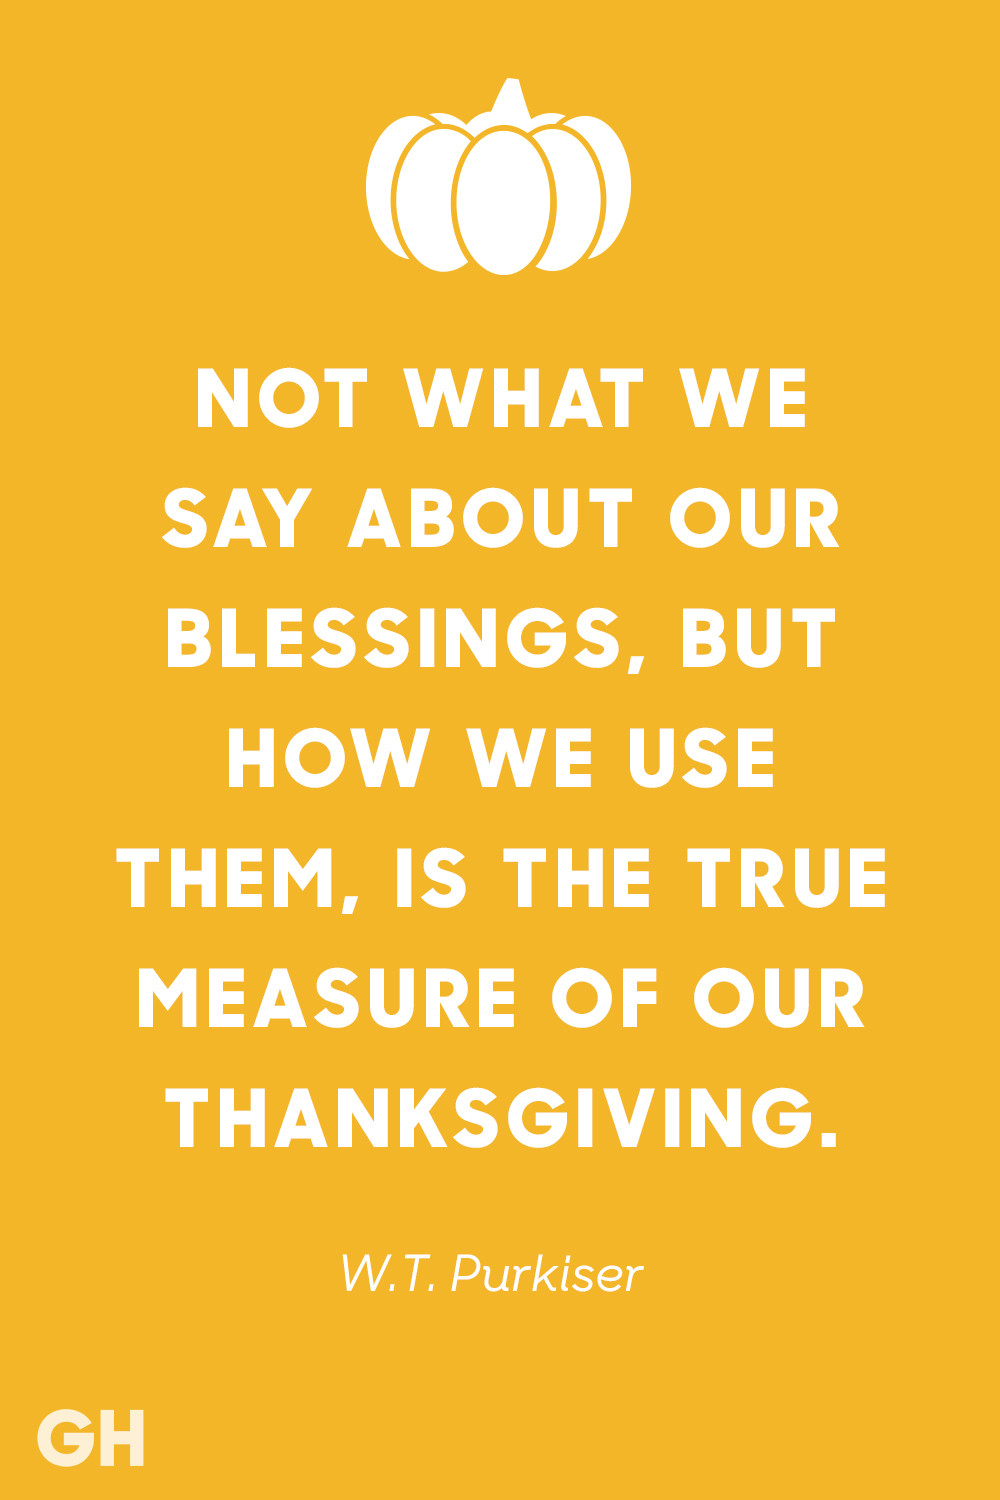 Quotes For Thanksgiving
 15 Best Thanksgiving Quotes Inspirational and Funny